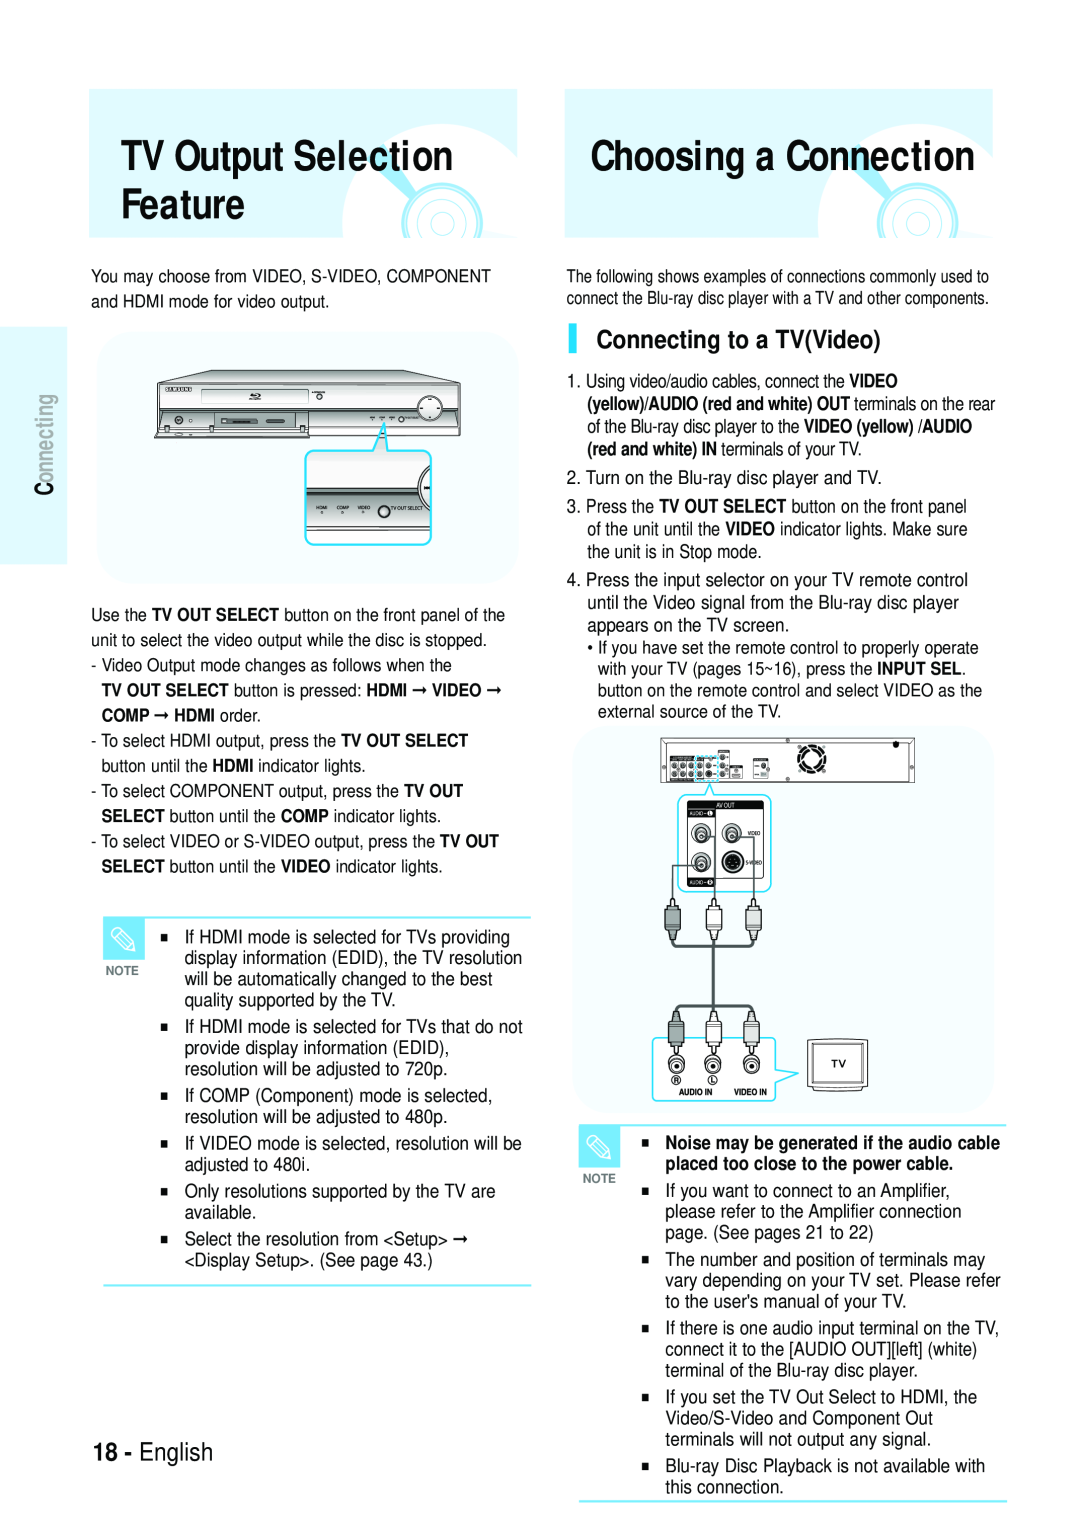 Samsung Blu-ray Disc manual Feature, TV Output Selection, Choosing a Connection, English, Connecting to a TVVideo 